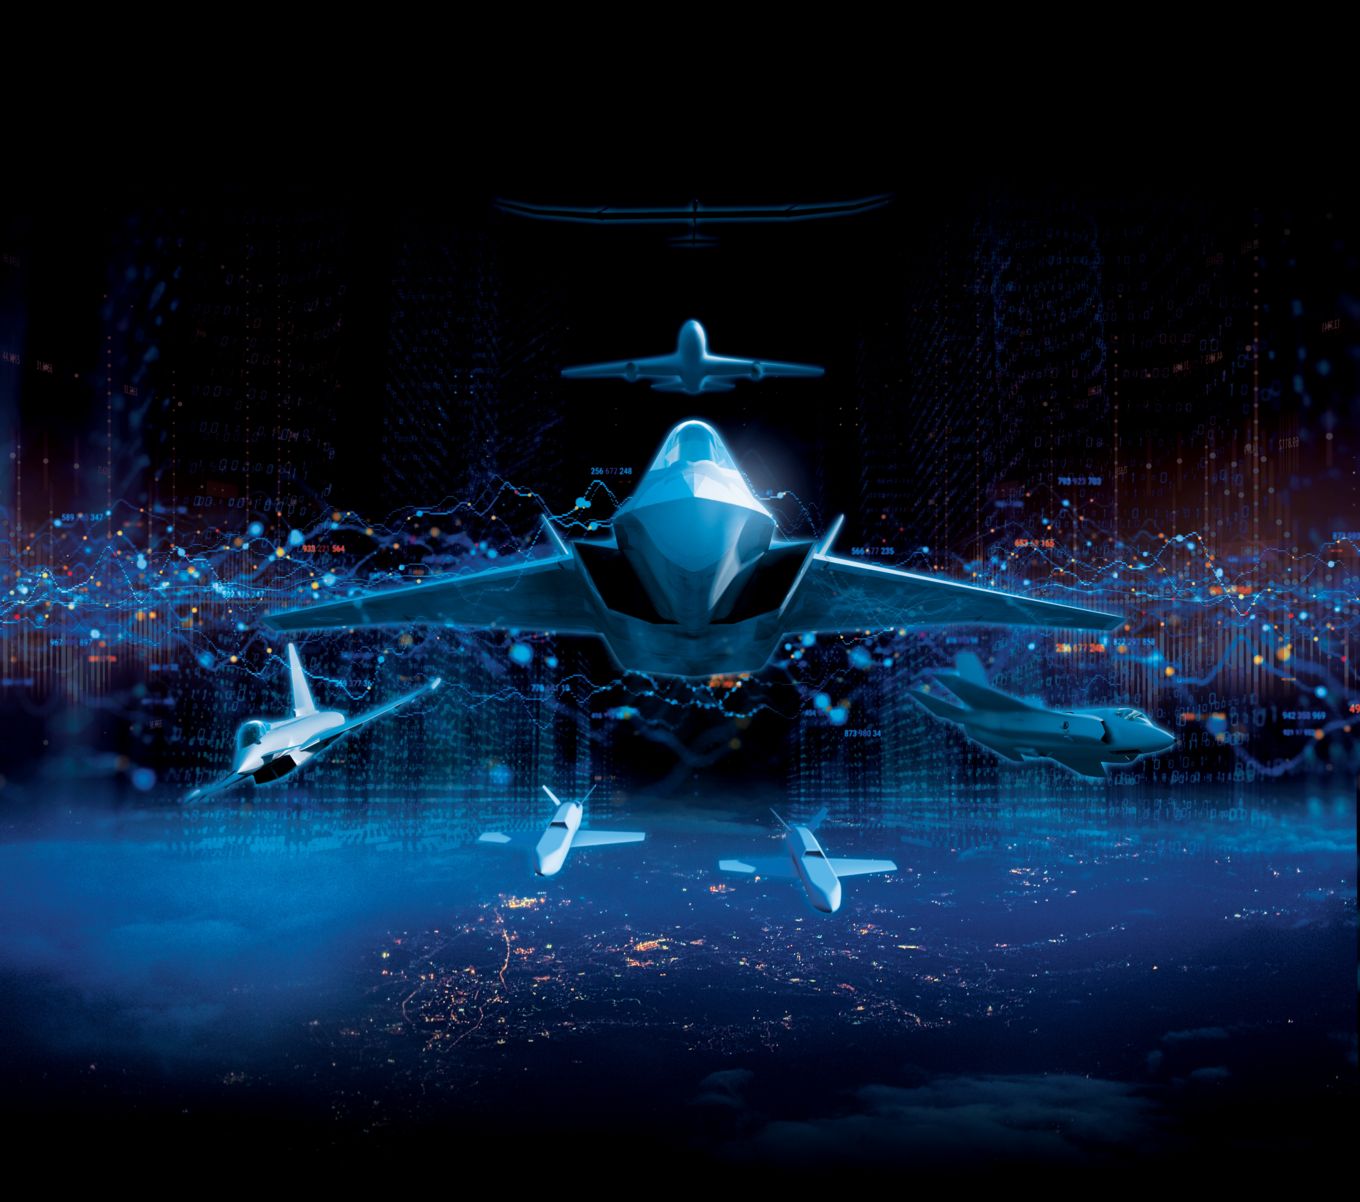 BAE Graphic of flying Systems Tempest aircraft.